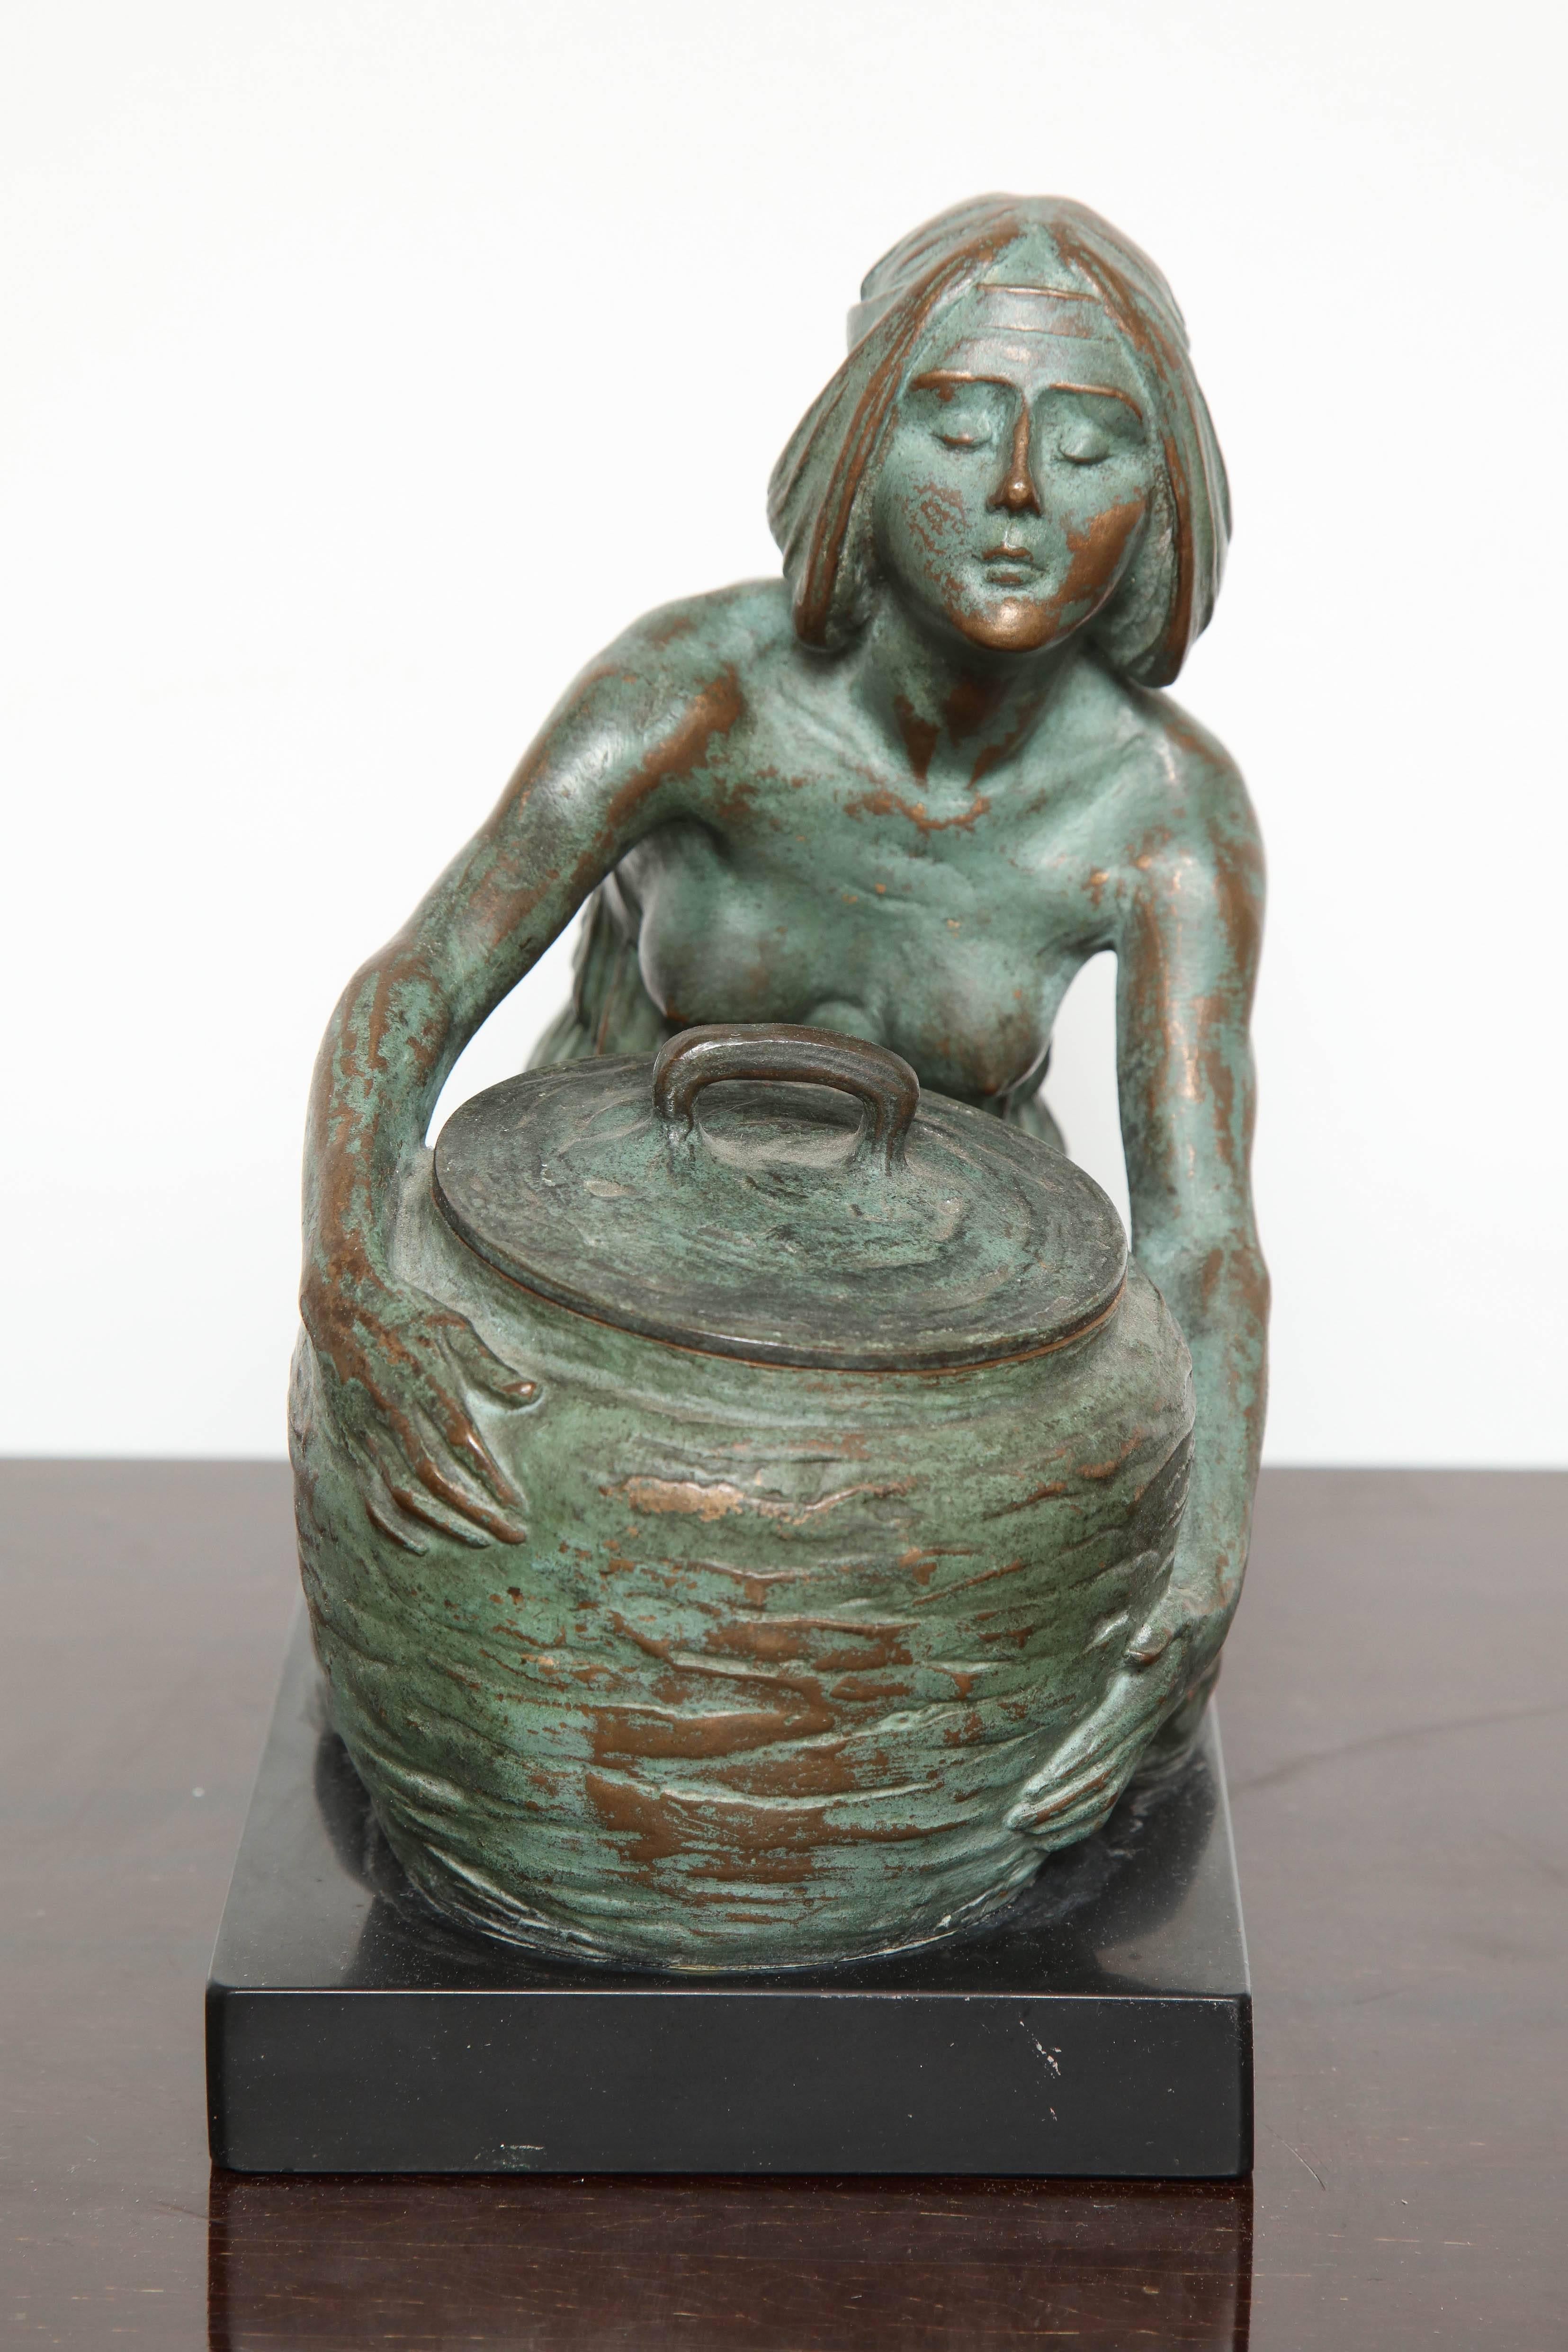 A Gustav Gurschner bronze inkwell. It was made in Austria during the early 20th century. The side of the inkwell is signed Gurschner.

Gustav Gurschner (1873–1970) was an Austrian sculptor active in the decorative arts.

He studied under August